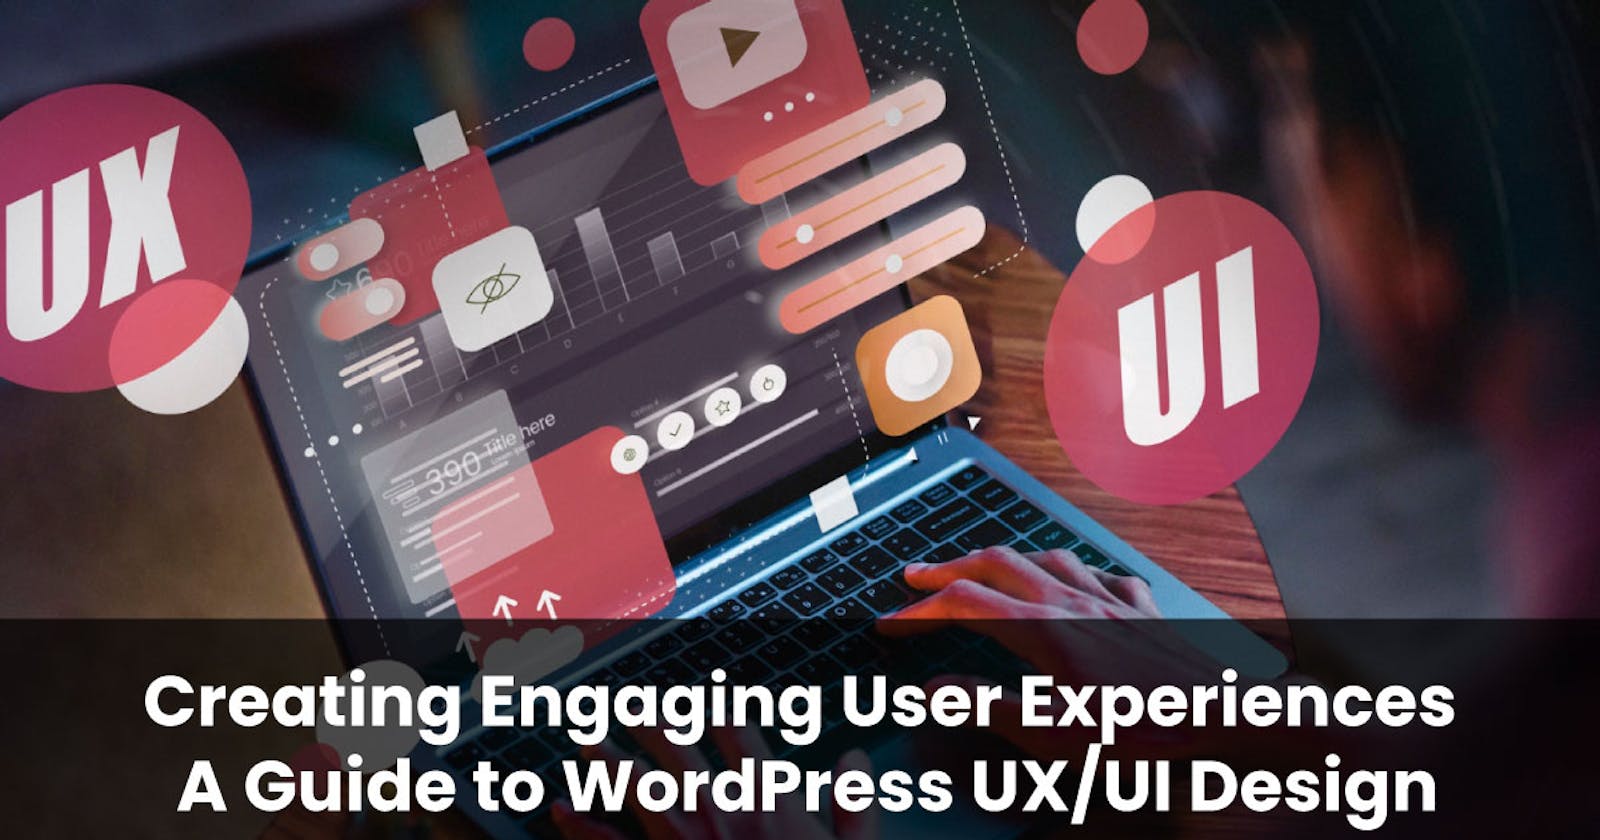 Creating Engaging User Experiences: A Guide to WordPress UX/UI Design